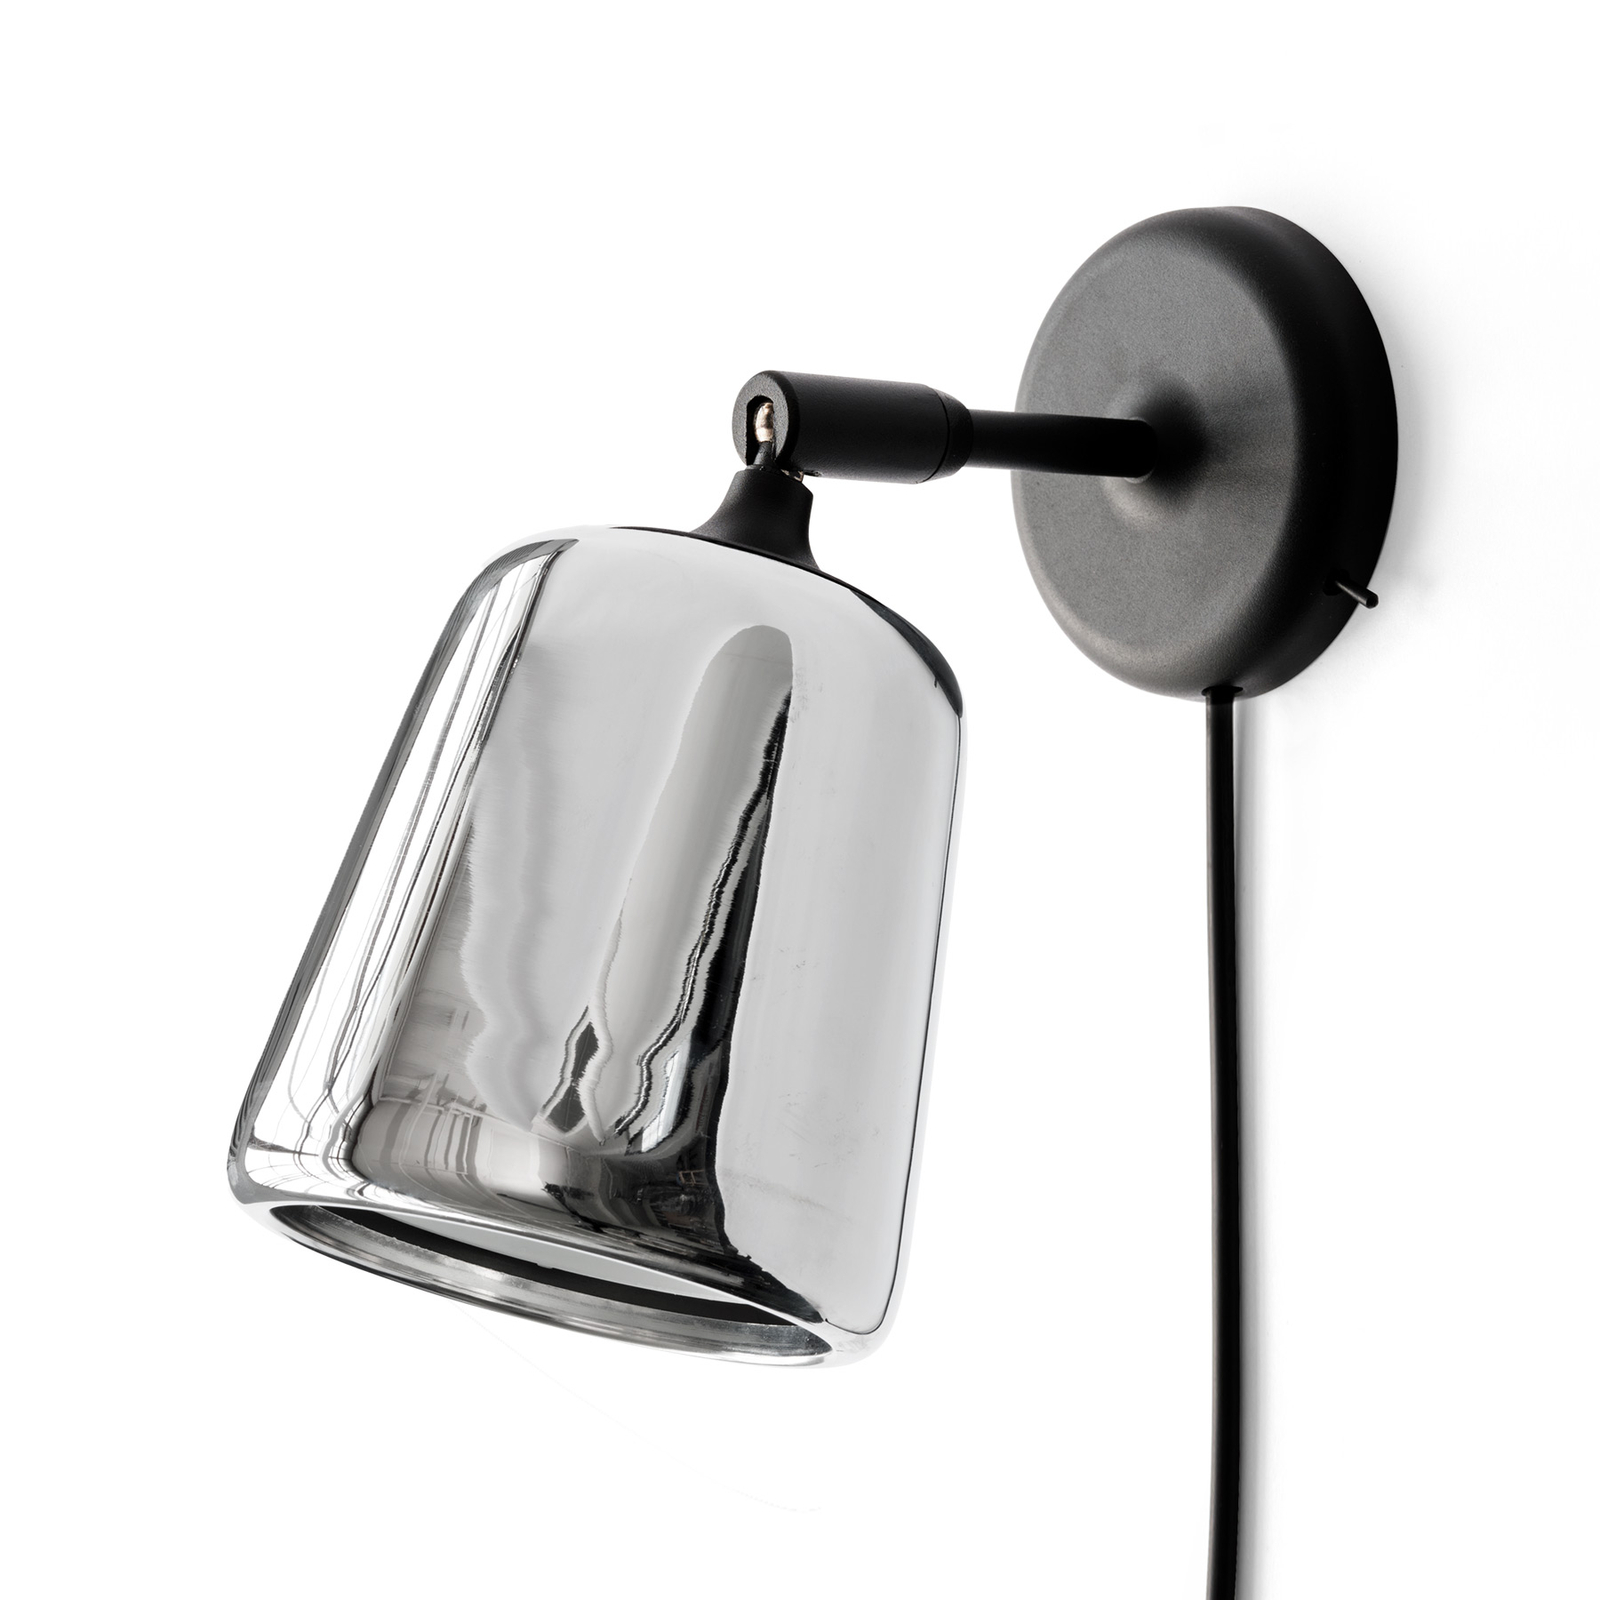 New Works Material New Edition wall lamp, steel